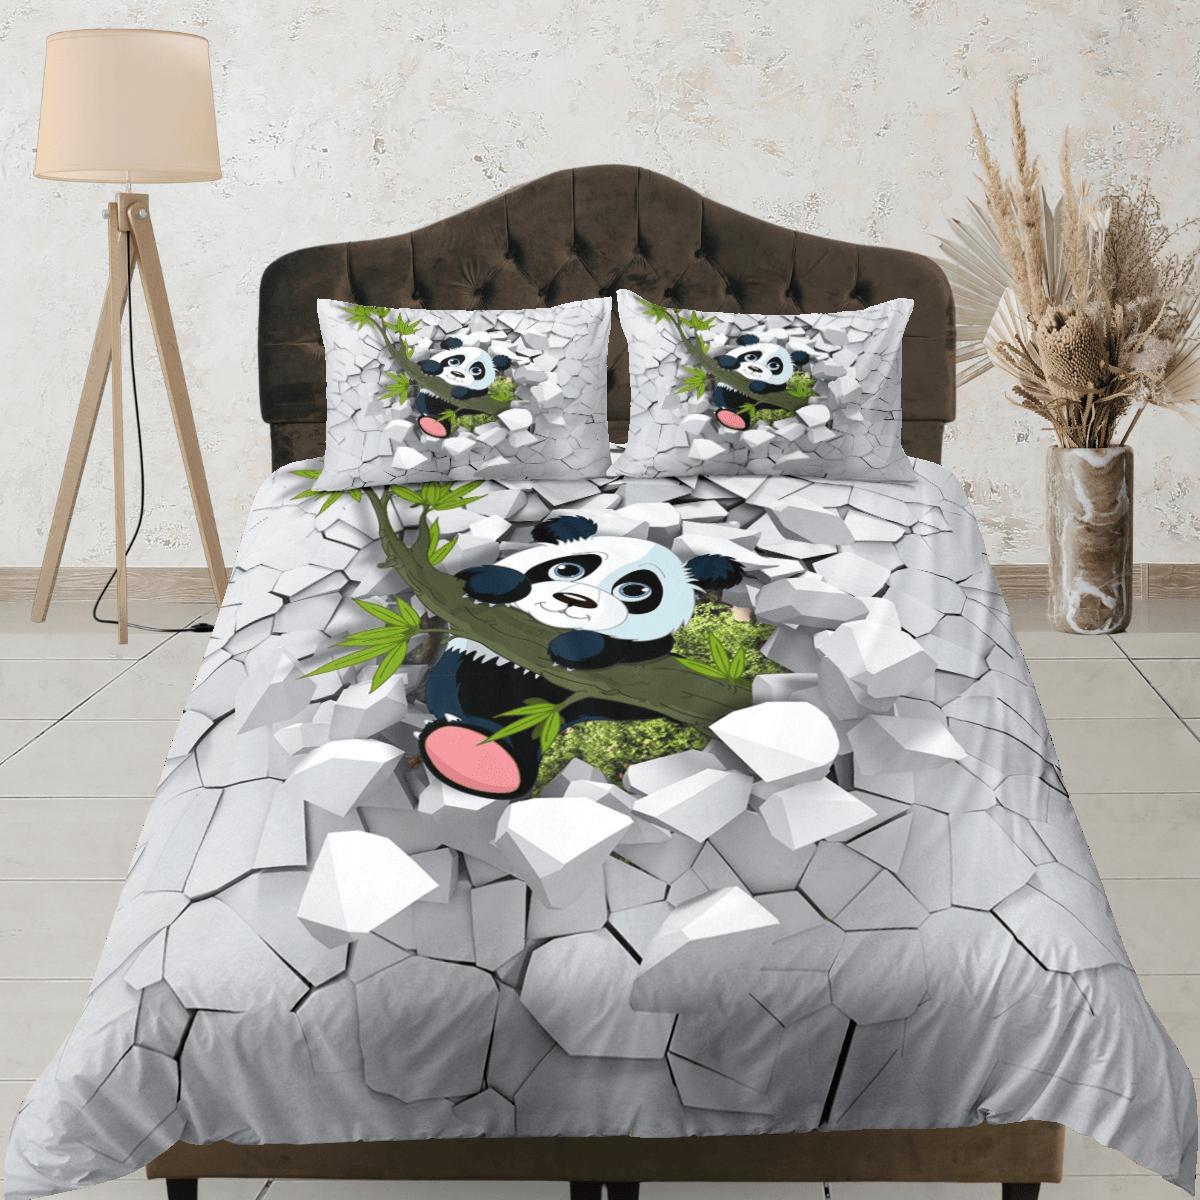 daintyduvet Cute Panda in Bamboo Duvet Cover Set Colorful Bedspread, Kids Full Bedding Set with Pillowcase, Comforter Cover Twin